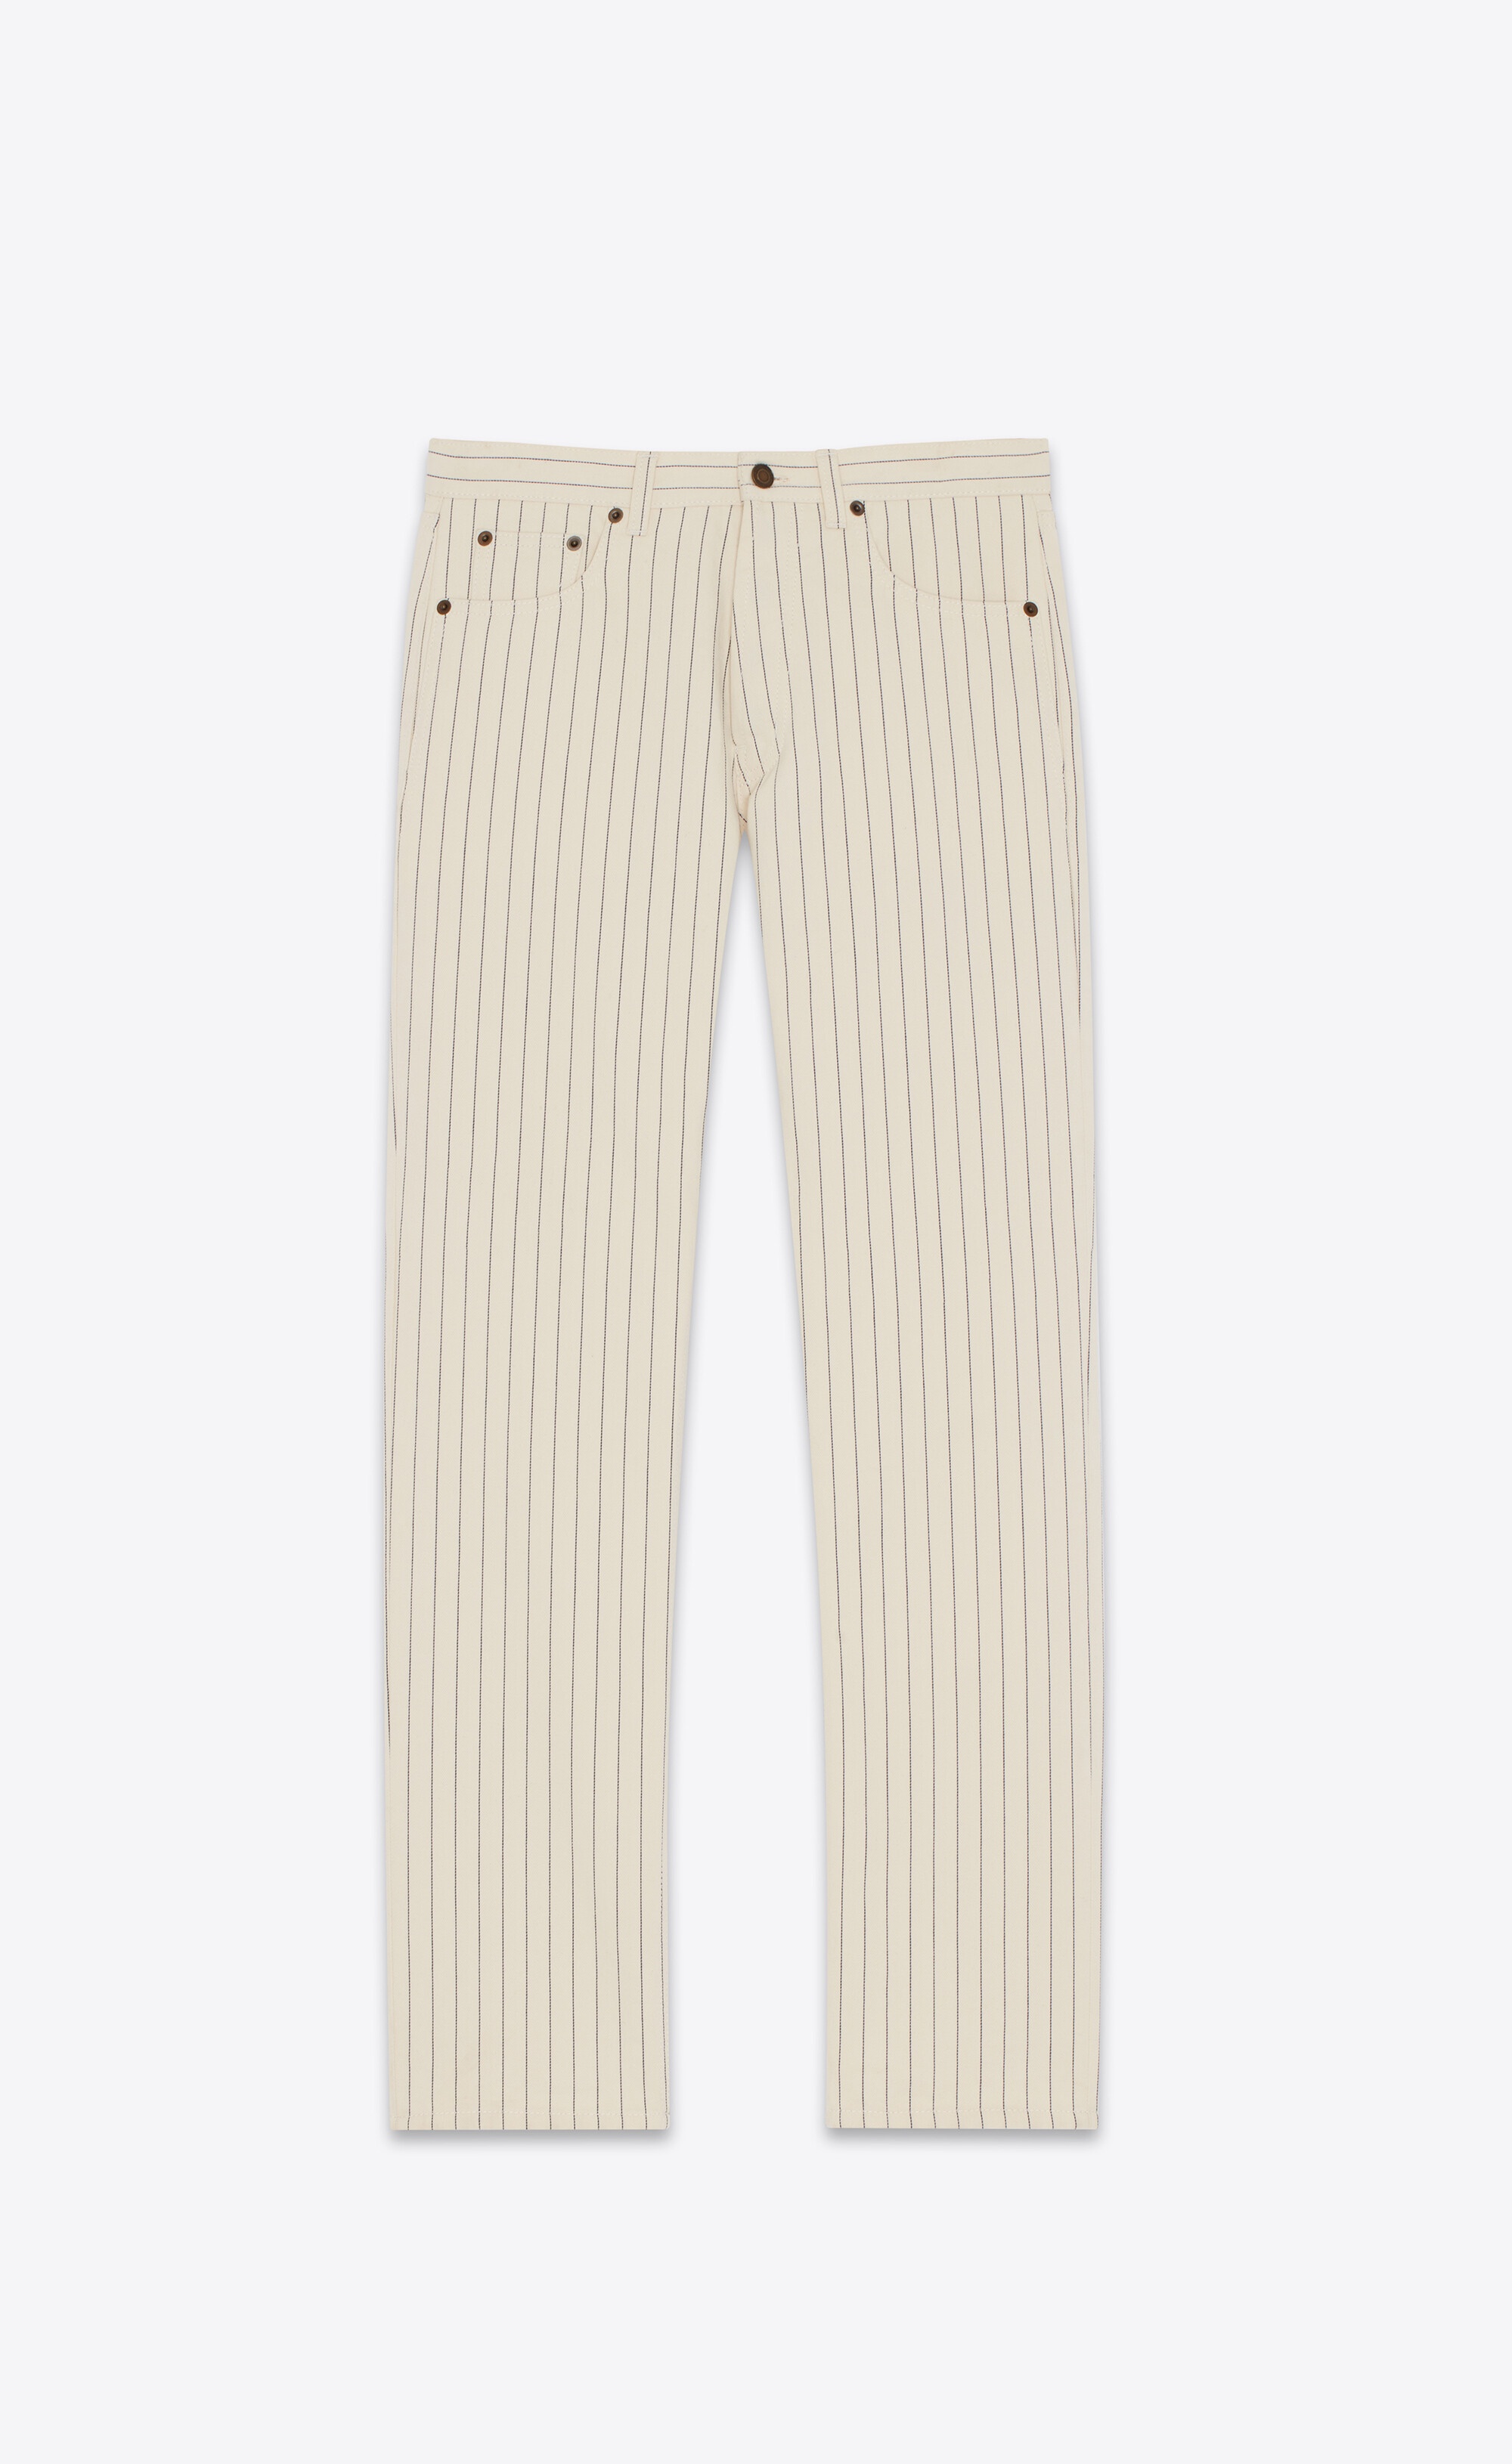 relaxed-fit jeans in striped grey off-white denim - 1